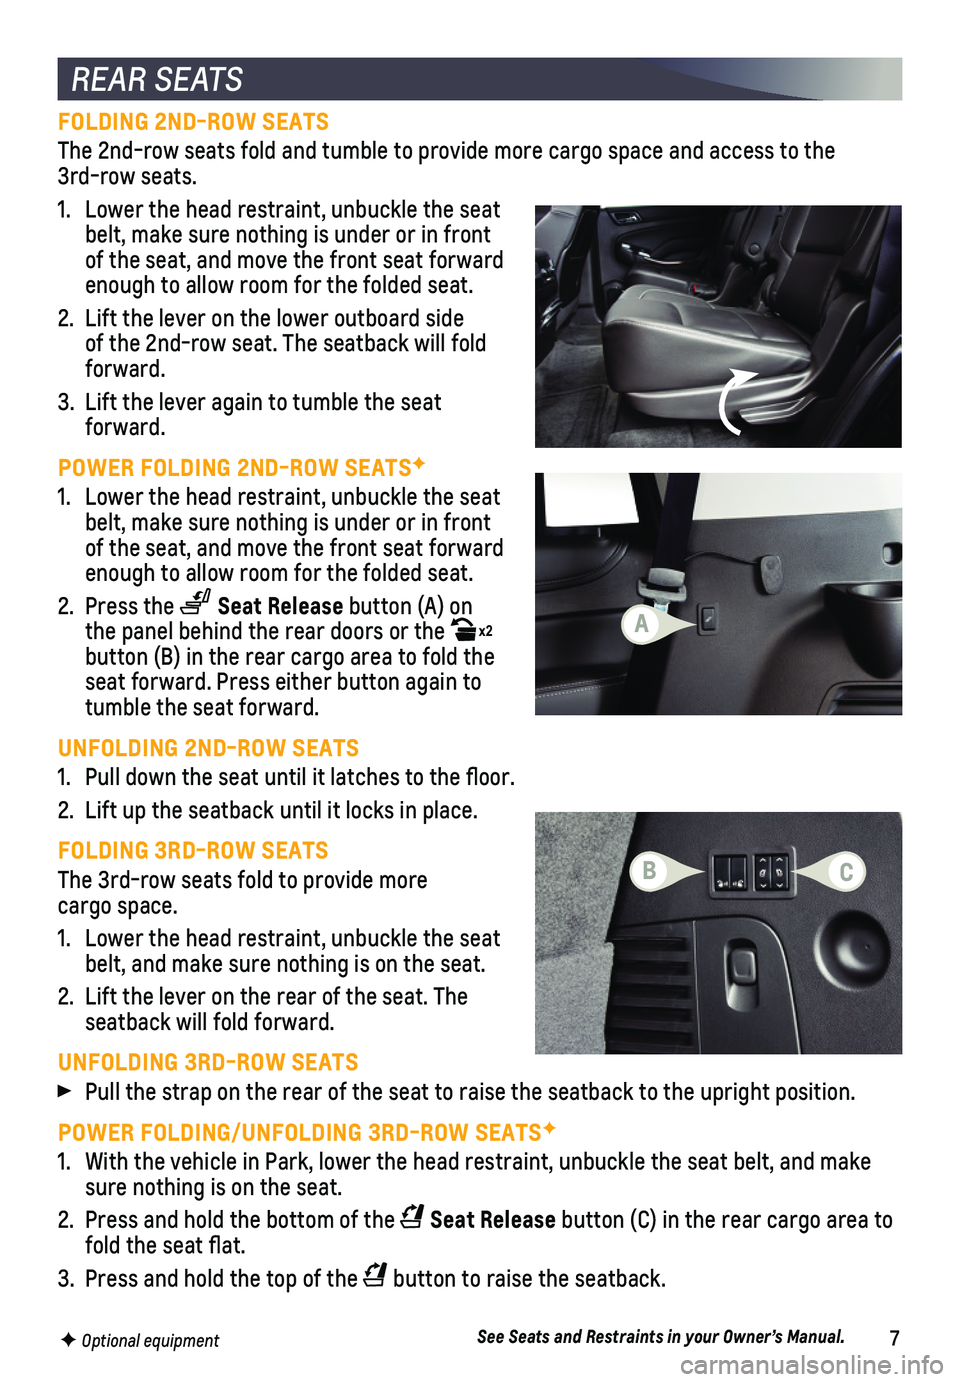 CHEVROLET SUBURBAN 2019  Get To Know Guide 7
FOLDING 2ND-ROW SEATS
The 2nd-row seats fold and tumble to provide more cargo space and access\
 to the  3rd-row seats.
1. Lower the head restraint, unbuckle the seat belt, make sure nothing is unde